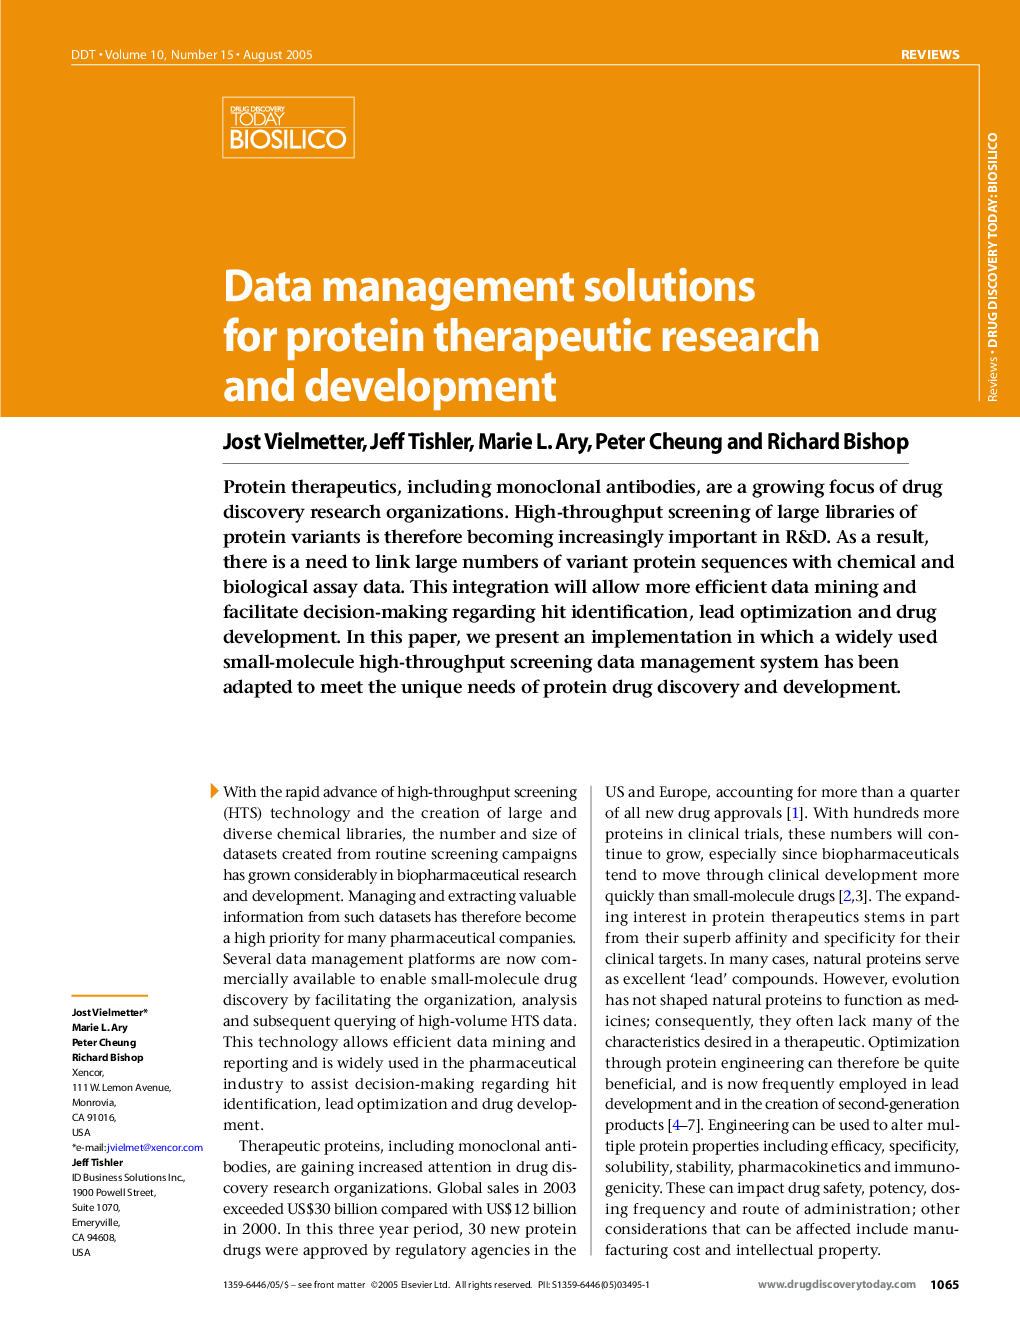 Data management solutions for protein therapeutic research and development